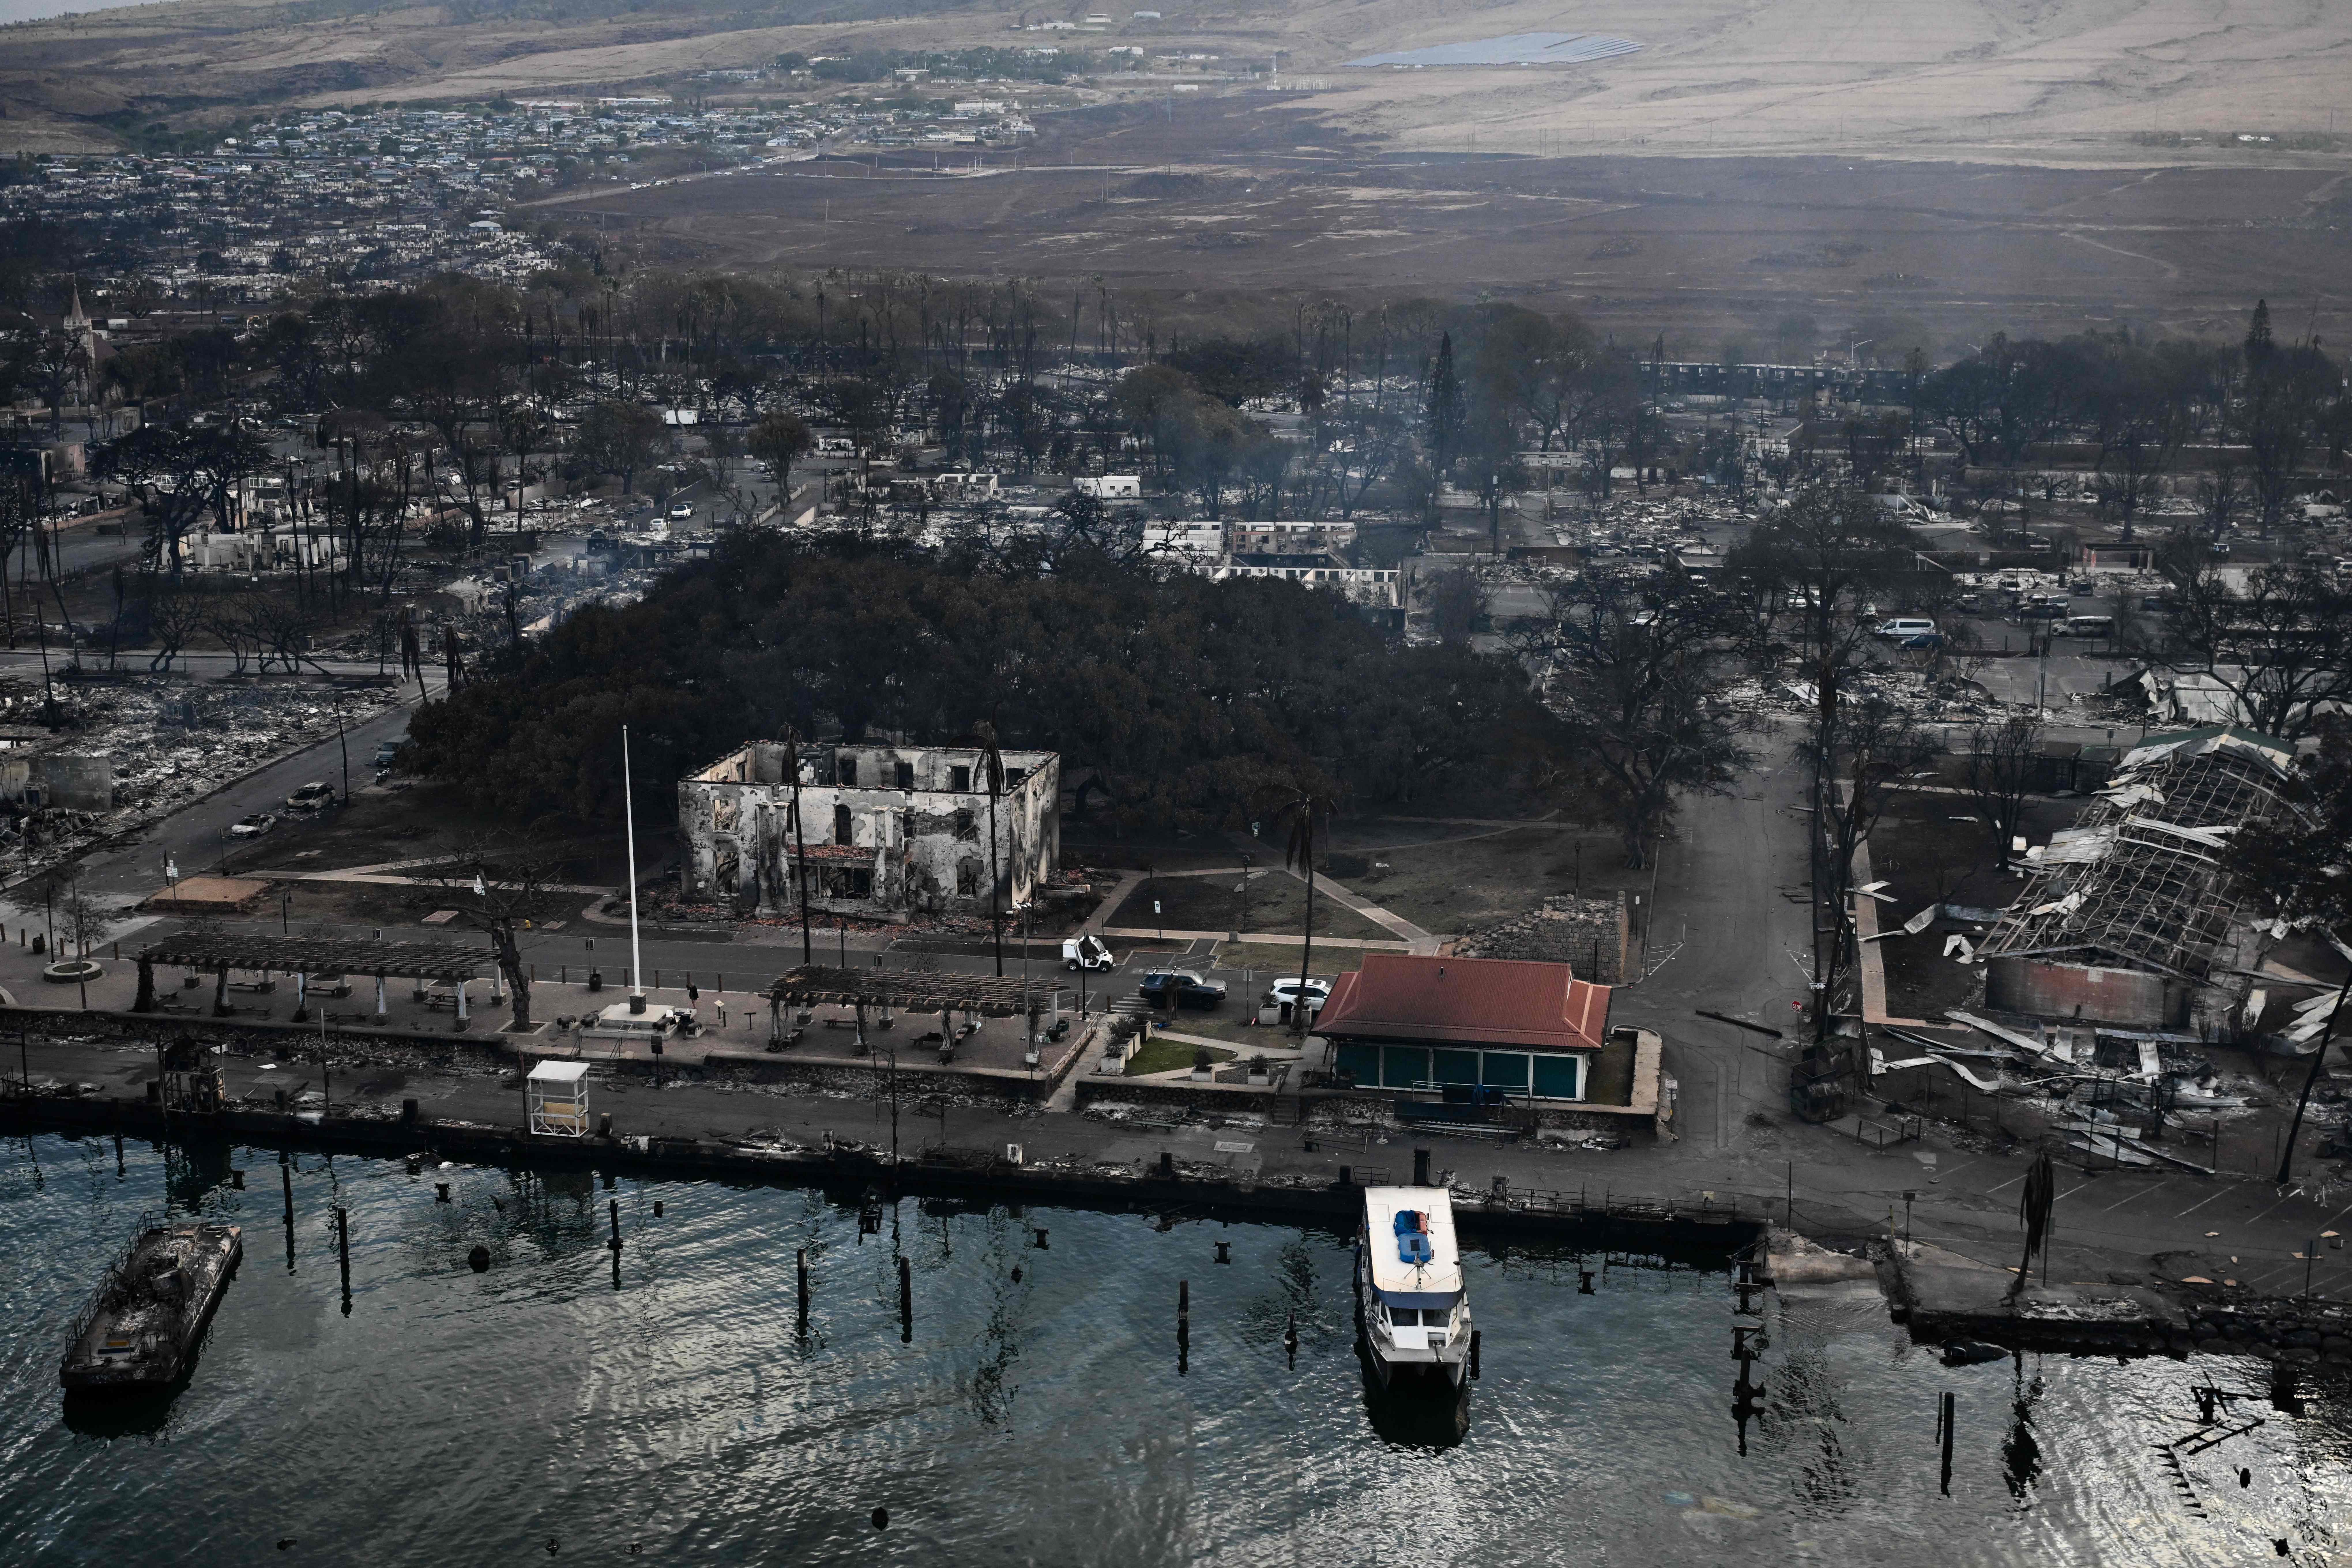 An aerial view shows the historic Banyan Tree along with destroyed homes, boats, and buildings burned to the ground in the historic Lahaina town in the aftermath of wildfires in western Maui in Lahaina, Hawaii, on August 10, 2023. At least 36 people have died after a fast-moving wildfire turned Lahaina to ashes, officials said August 9, as visitors asked to leave the island of Maui found themselves stranded at the airport. The fires began burning early August 8, scorching thousands of acres and putting homes, businesses and 35,000 lives at risk on Maui, the Hawaii Emergency Management Agency said in a statement. (Photo by Patrick T. Fallon / AFP) (Photo by PATRICK T. FALLON/AFP via Getty Images)